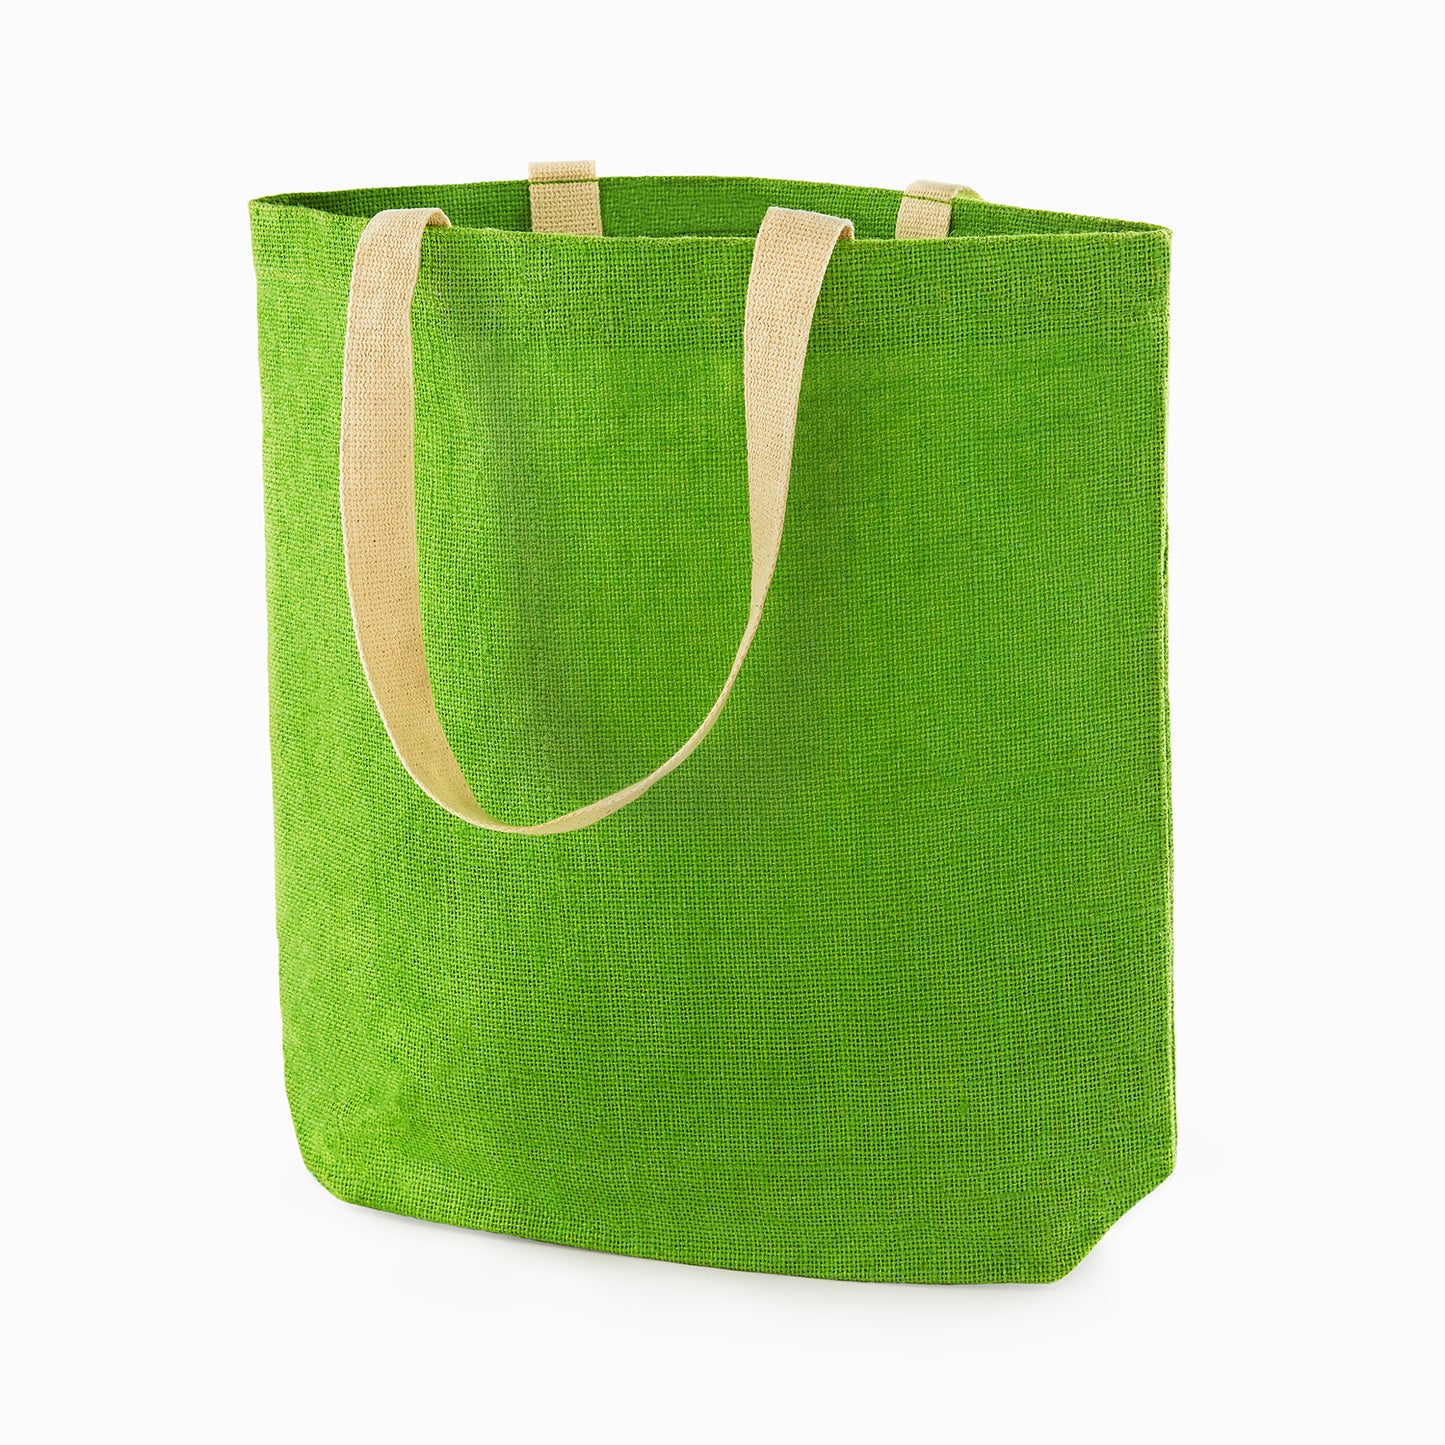 Green Jute Bag - Say No to Plastic, Yes to Change!